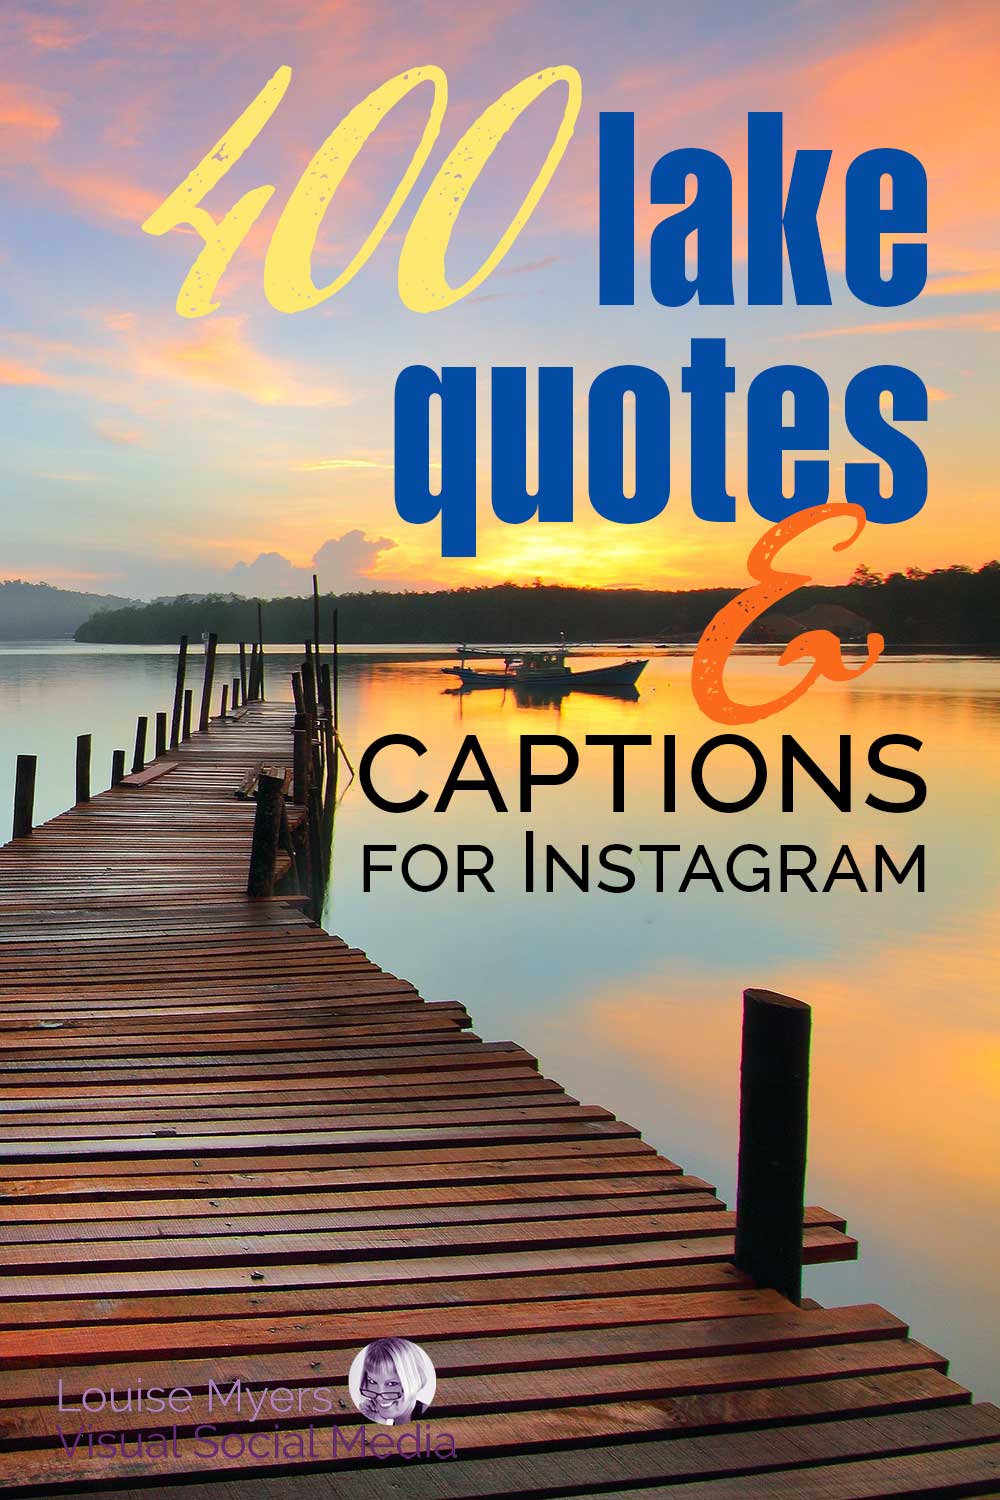 sunset over dock on lake says 400 lake quotes and captions for instagram.